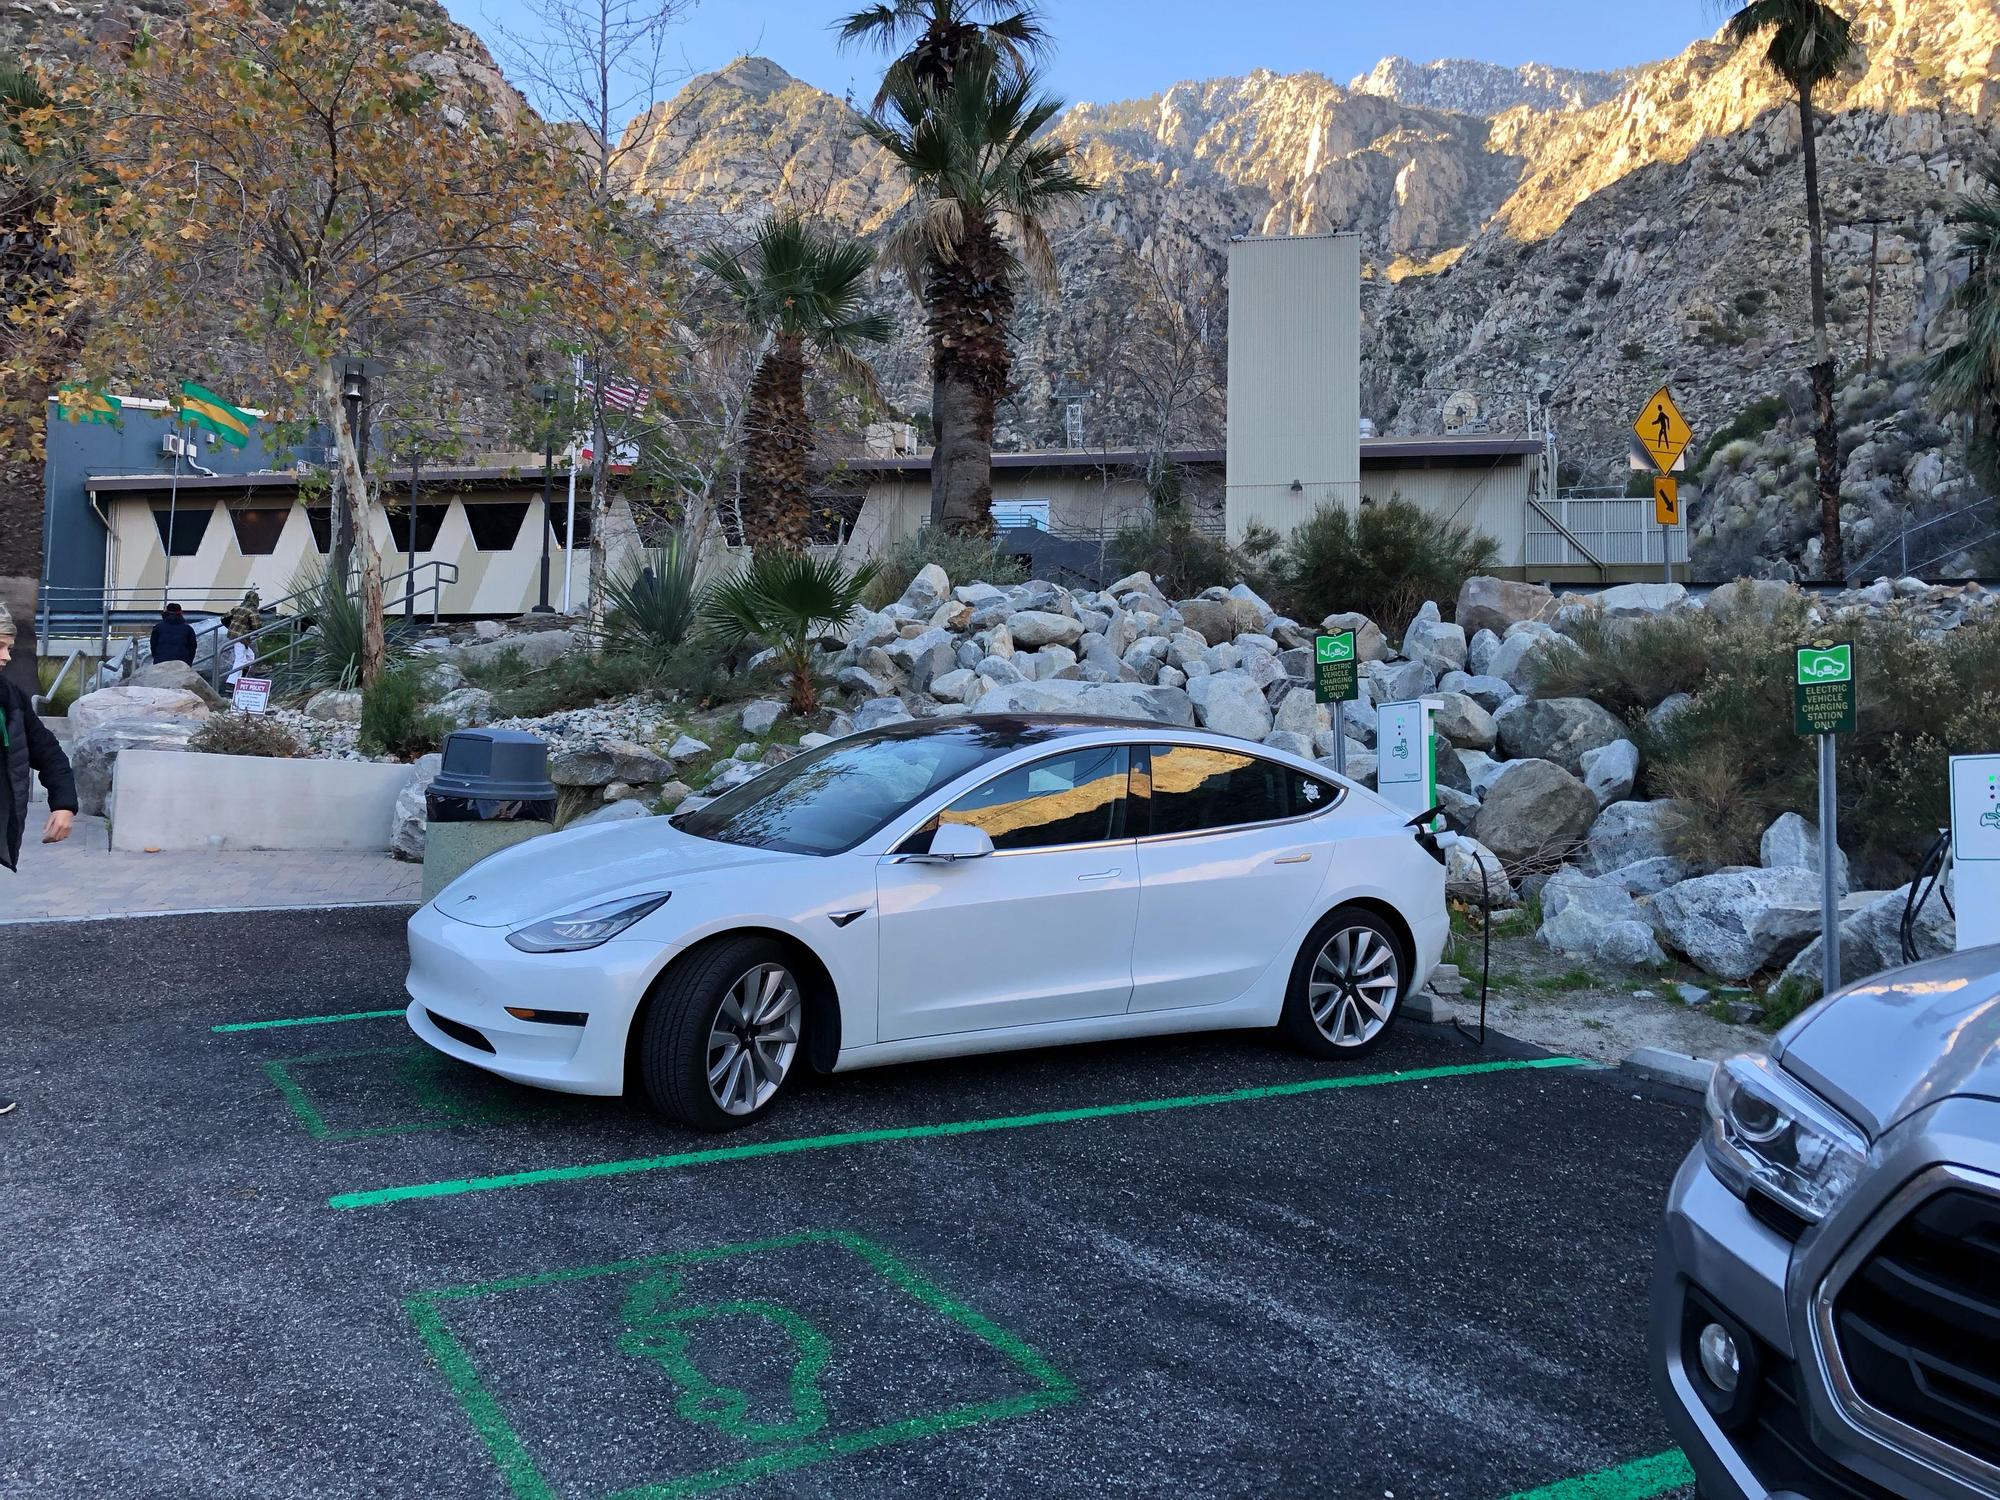 Palm Springs tram charging station